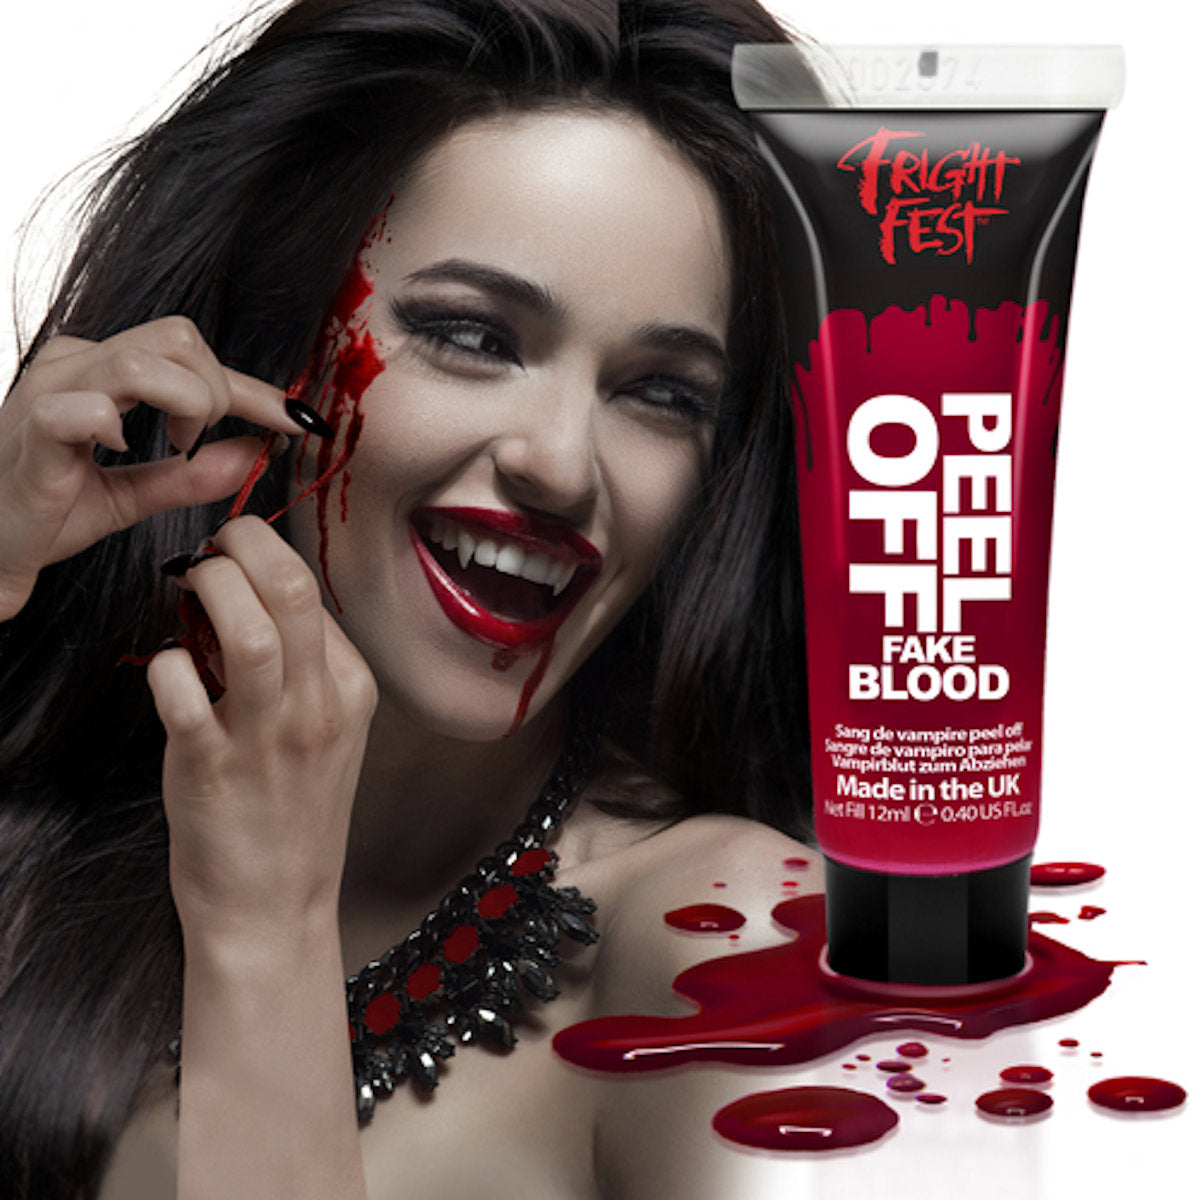 Peel Off Fake Blood Fright Fest Halloween Make Up Special FX